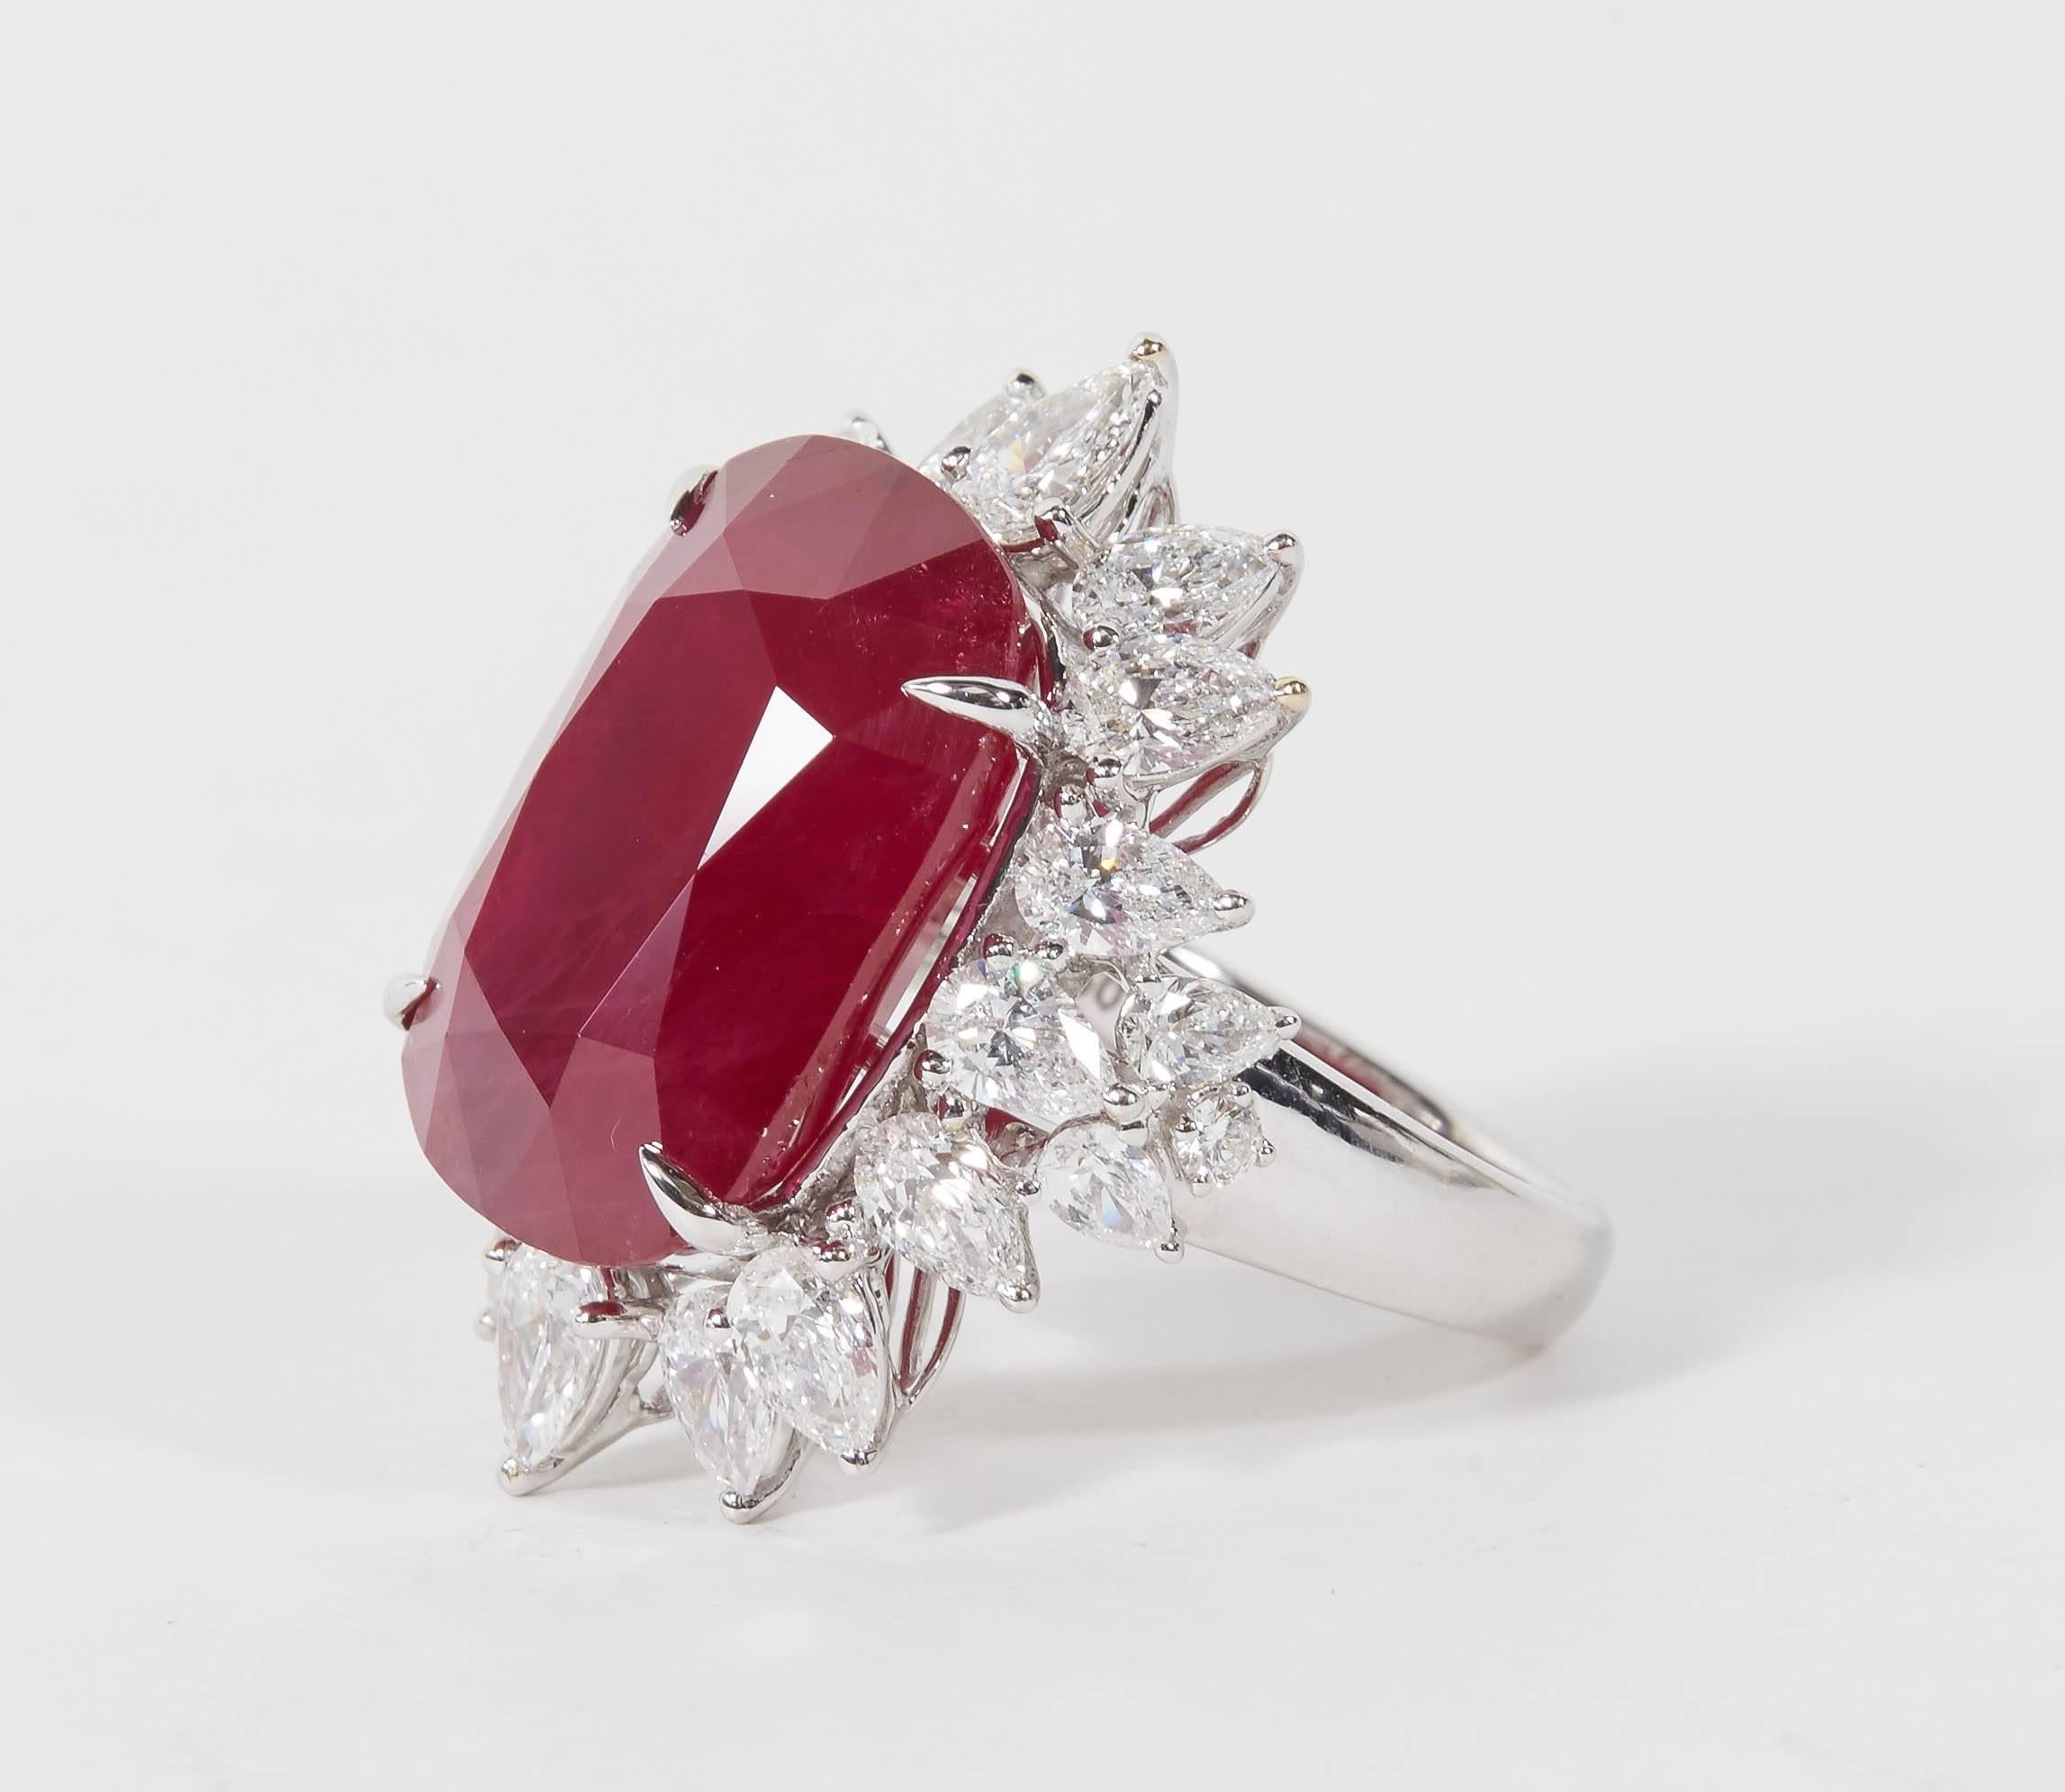 Cushion Cut Impressive 24.64 Carat Ruby and Diamond Ring For Sale